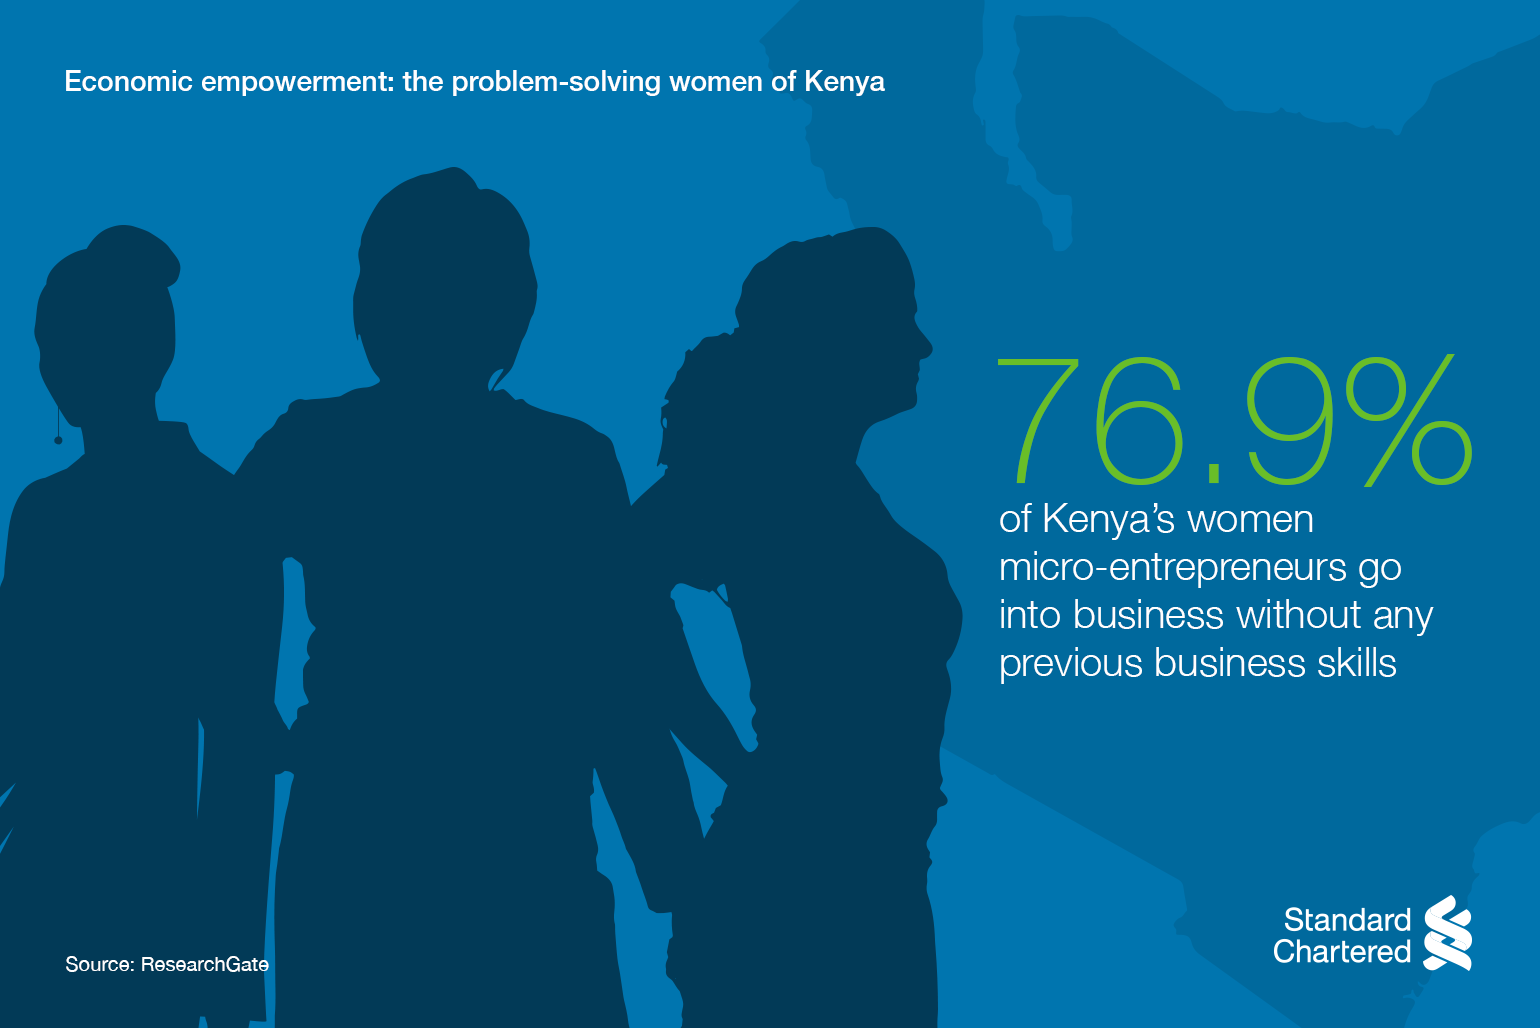 76.9% of Kenya's women micro-entrepreneurs go into business without any previous business skills